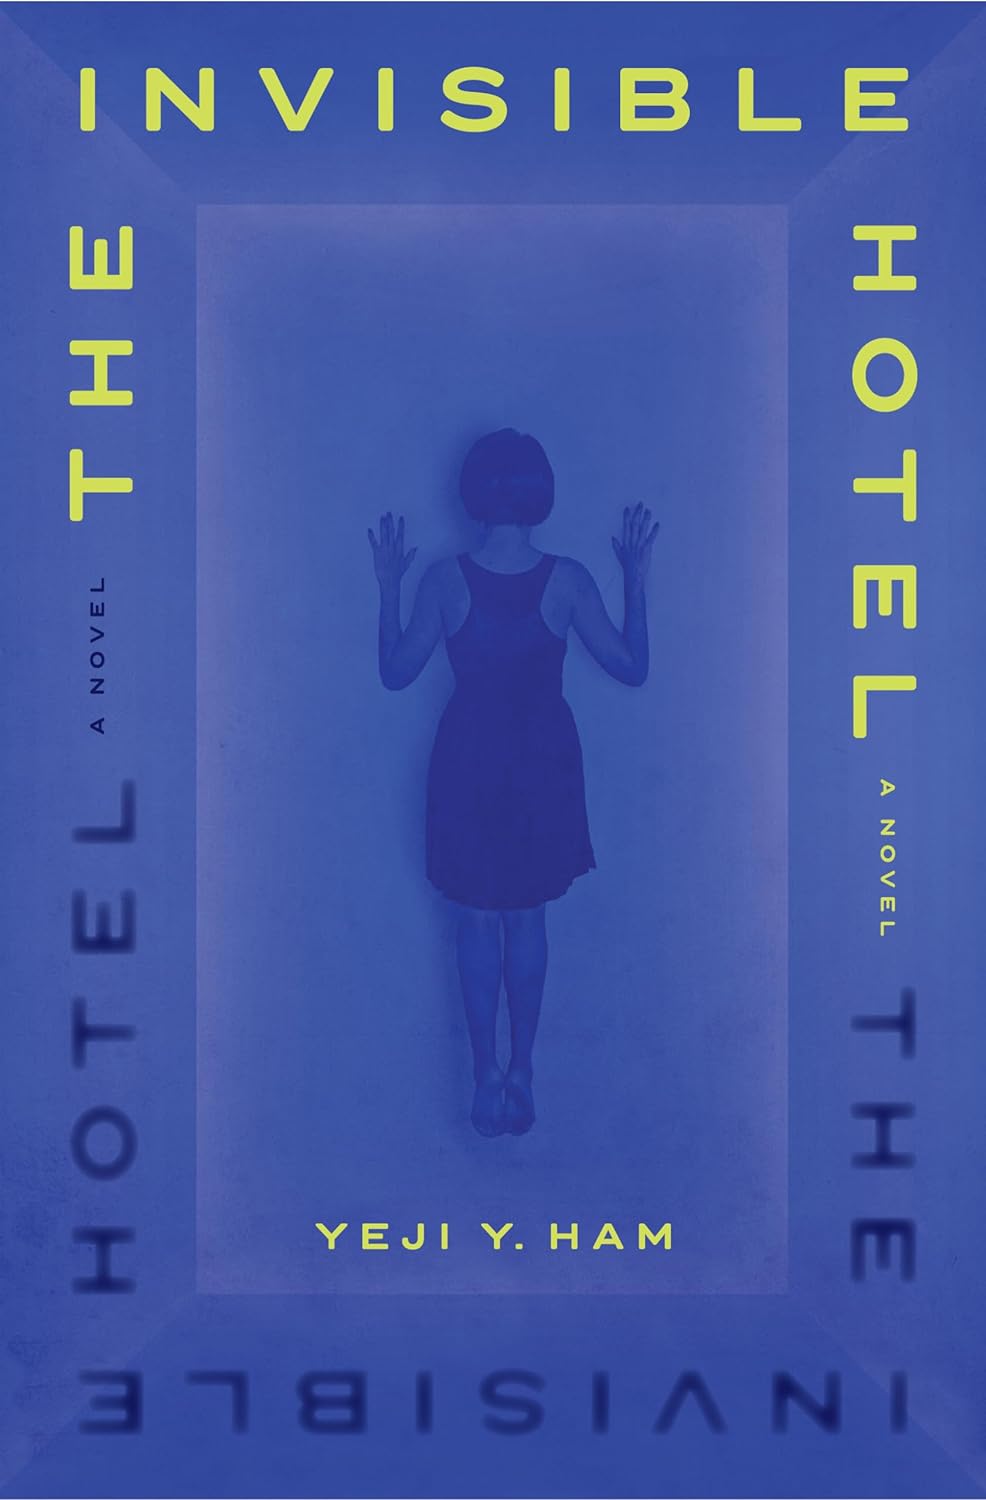 Ian Mond Reviews The Invisible Hotel by Yeji Y. Ham